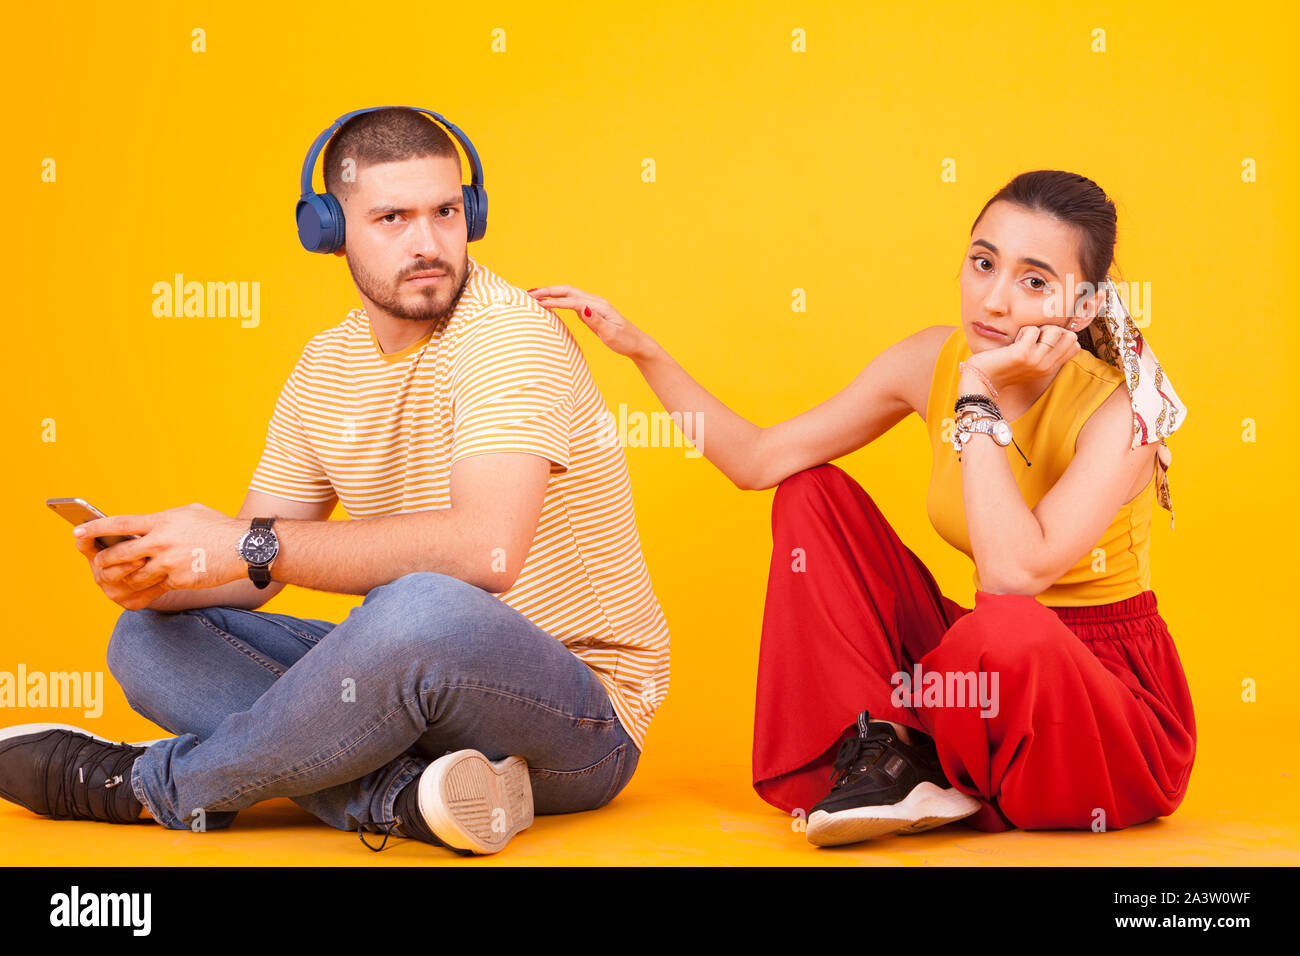 Sad girlfriend on her boyfriend because staying too much on his phone. Relationship problem Stock Photo